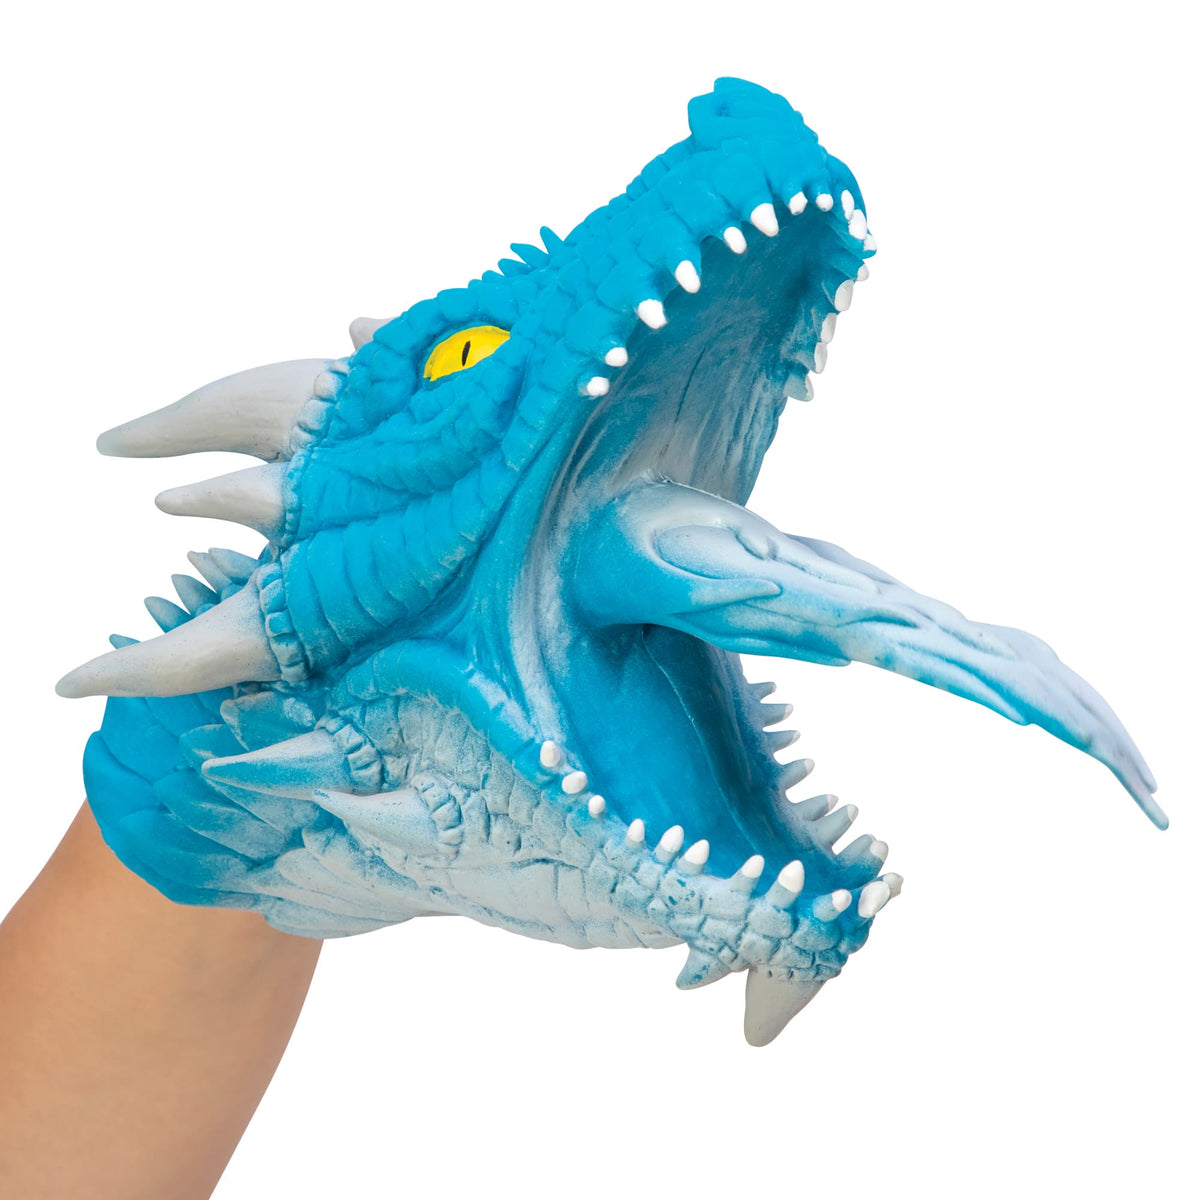 Side view of a blue dragon hand puppet on a hand.